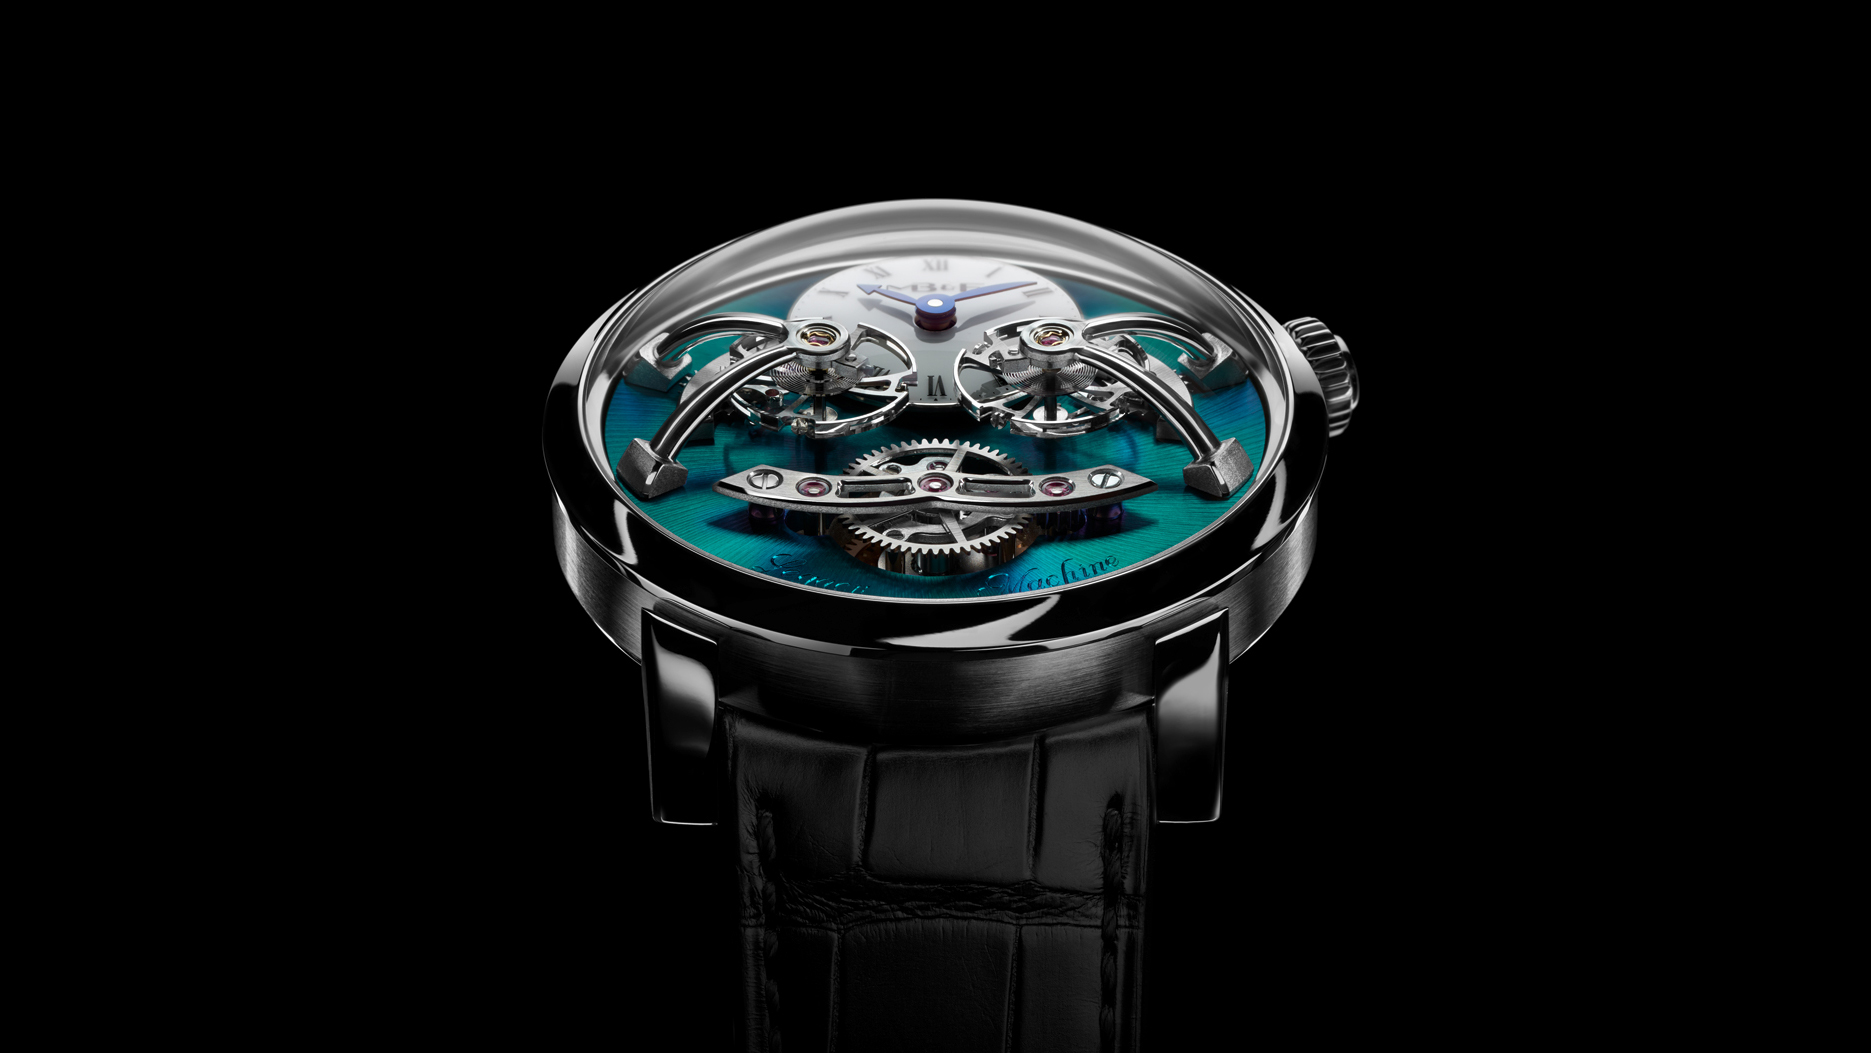 Mb&f Watches | Chrono24.in